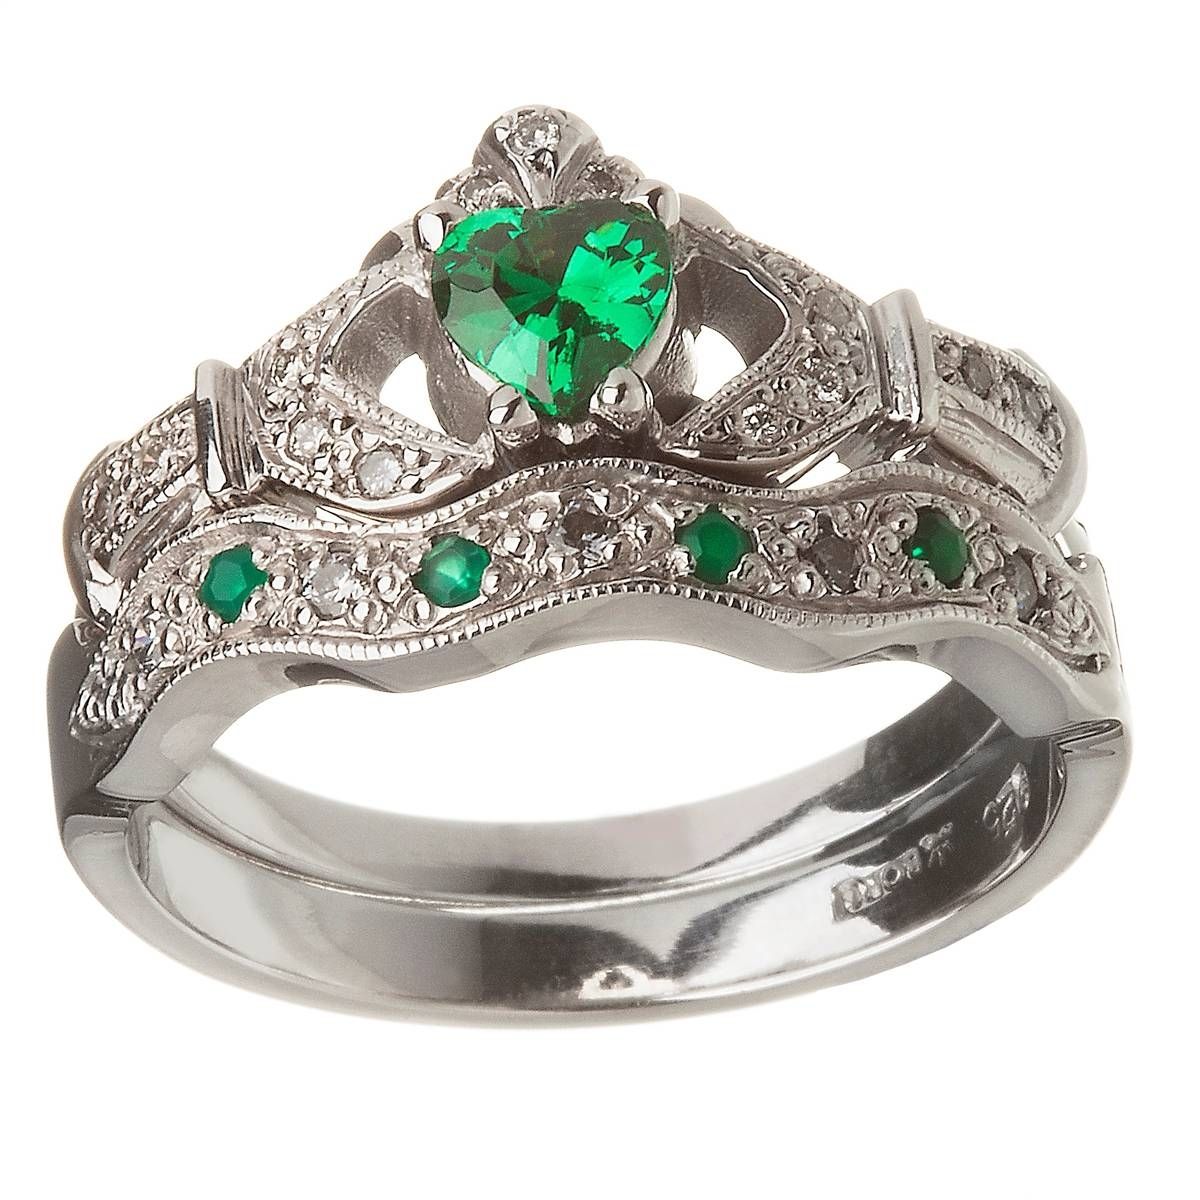 14k White Gold Emerald Set Heart Claddagh Ring & Wedding Ring Set Pertaining To Claddagh Rings Engagement Rings (View 3 of 15)